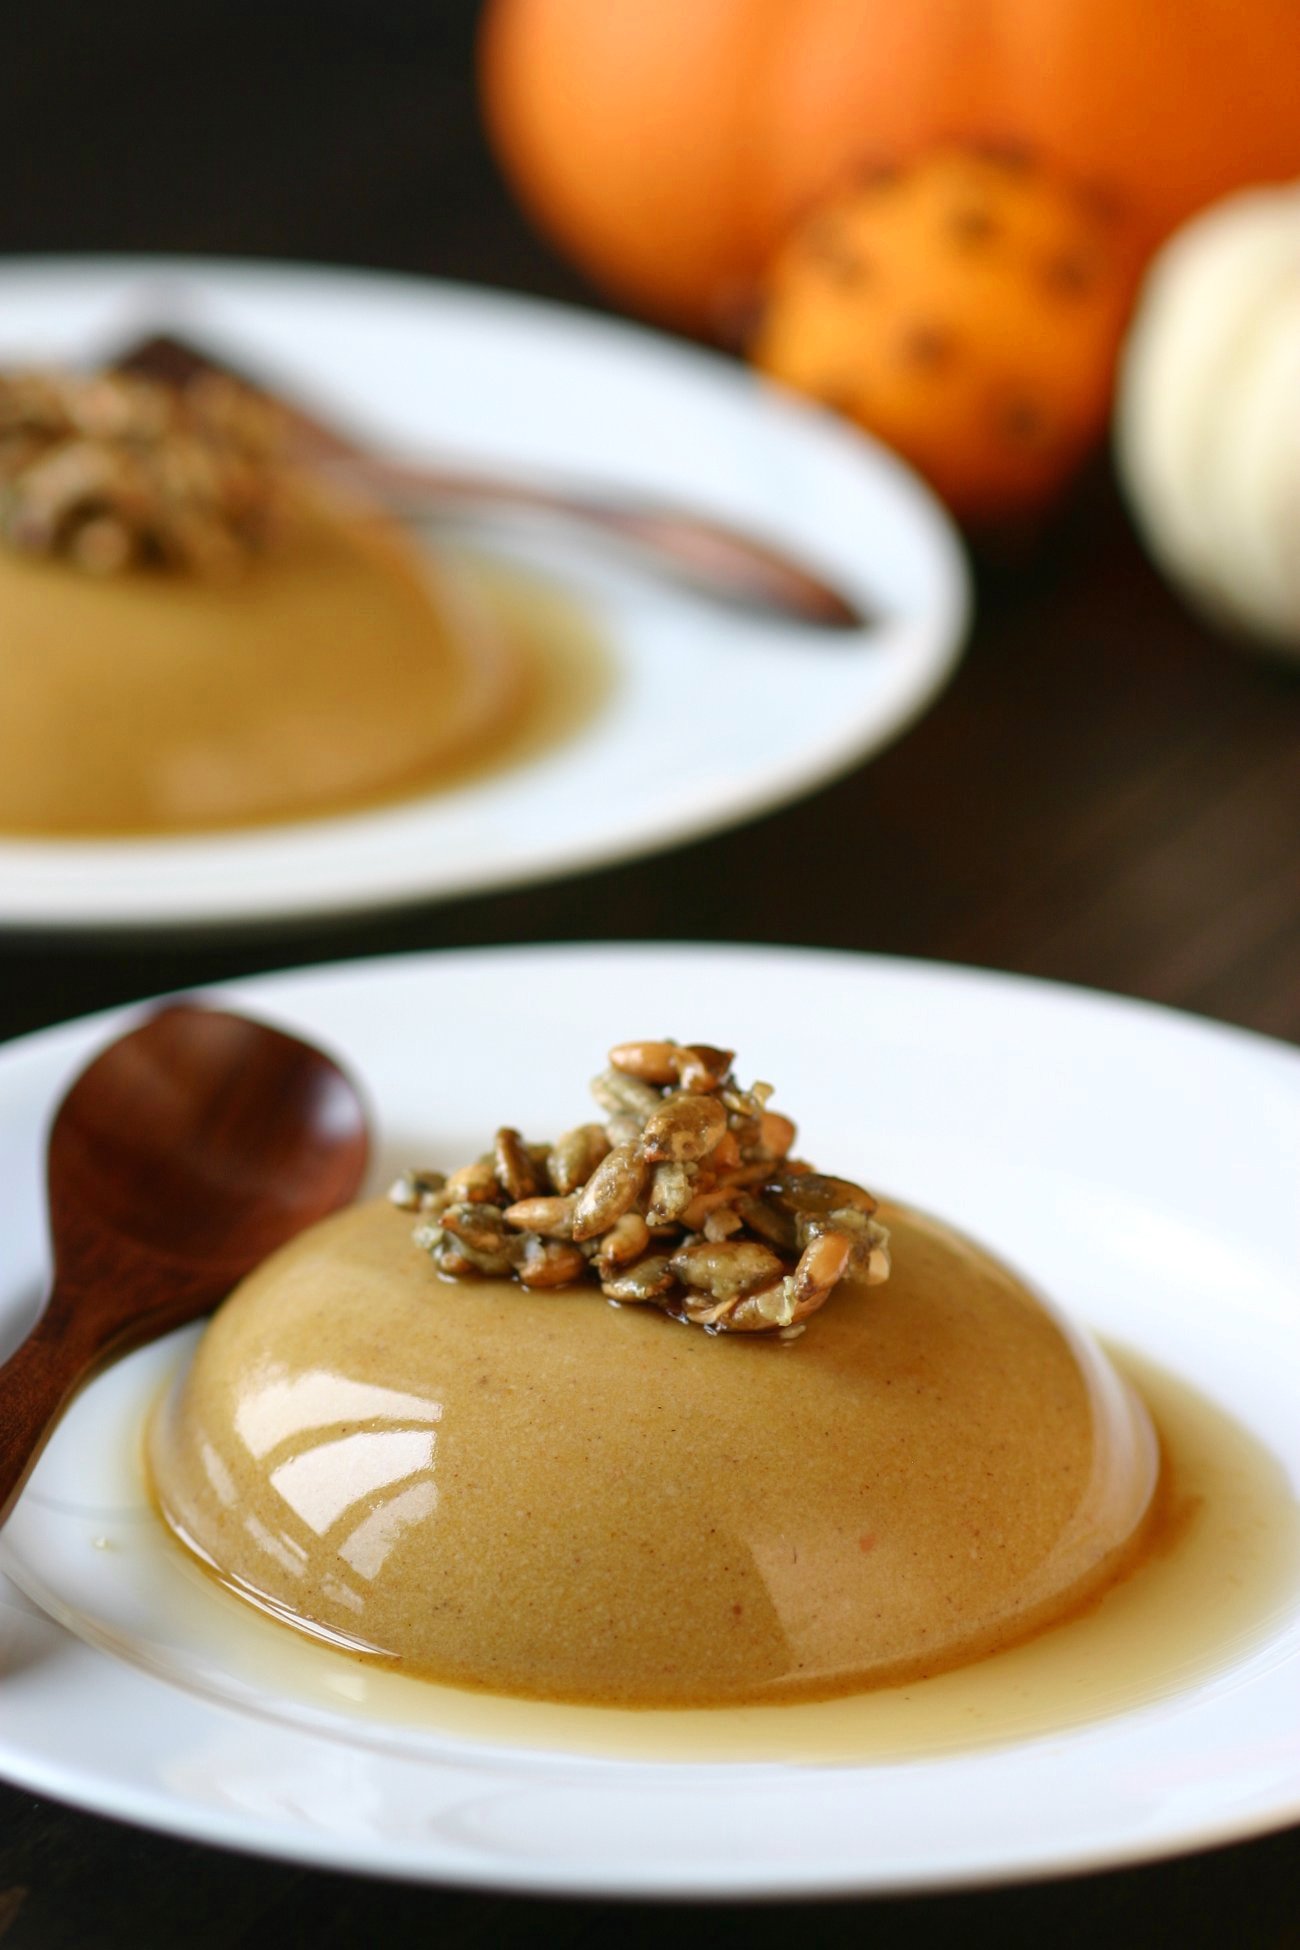 Silky and delicate, this recipe for Vegan Pumpkin Panna Cotta with Pumpkin Seed Brittle is a true showstopper.